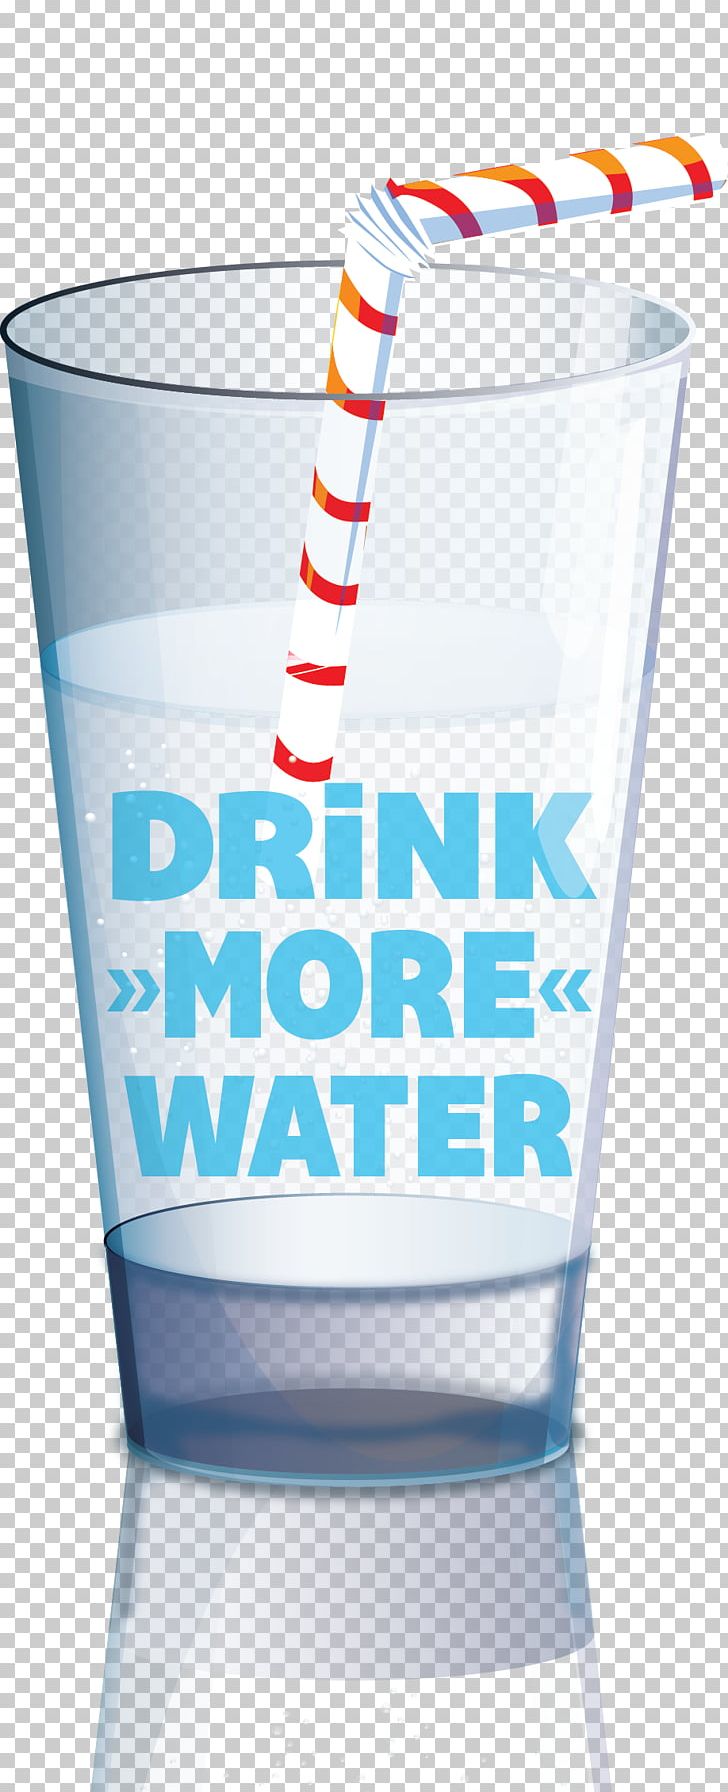 Old Fashioned Water Drinking Liquid PNG, Clipart, Cup, Drink, Drinking, Drinkware, Food Drinks Free PNG Download